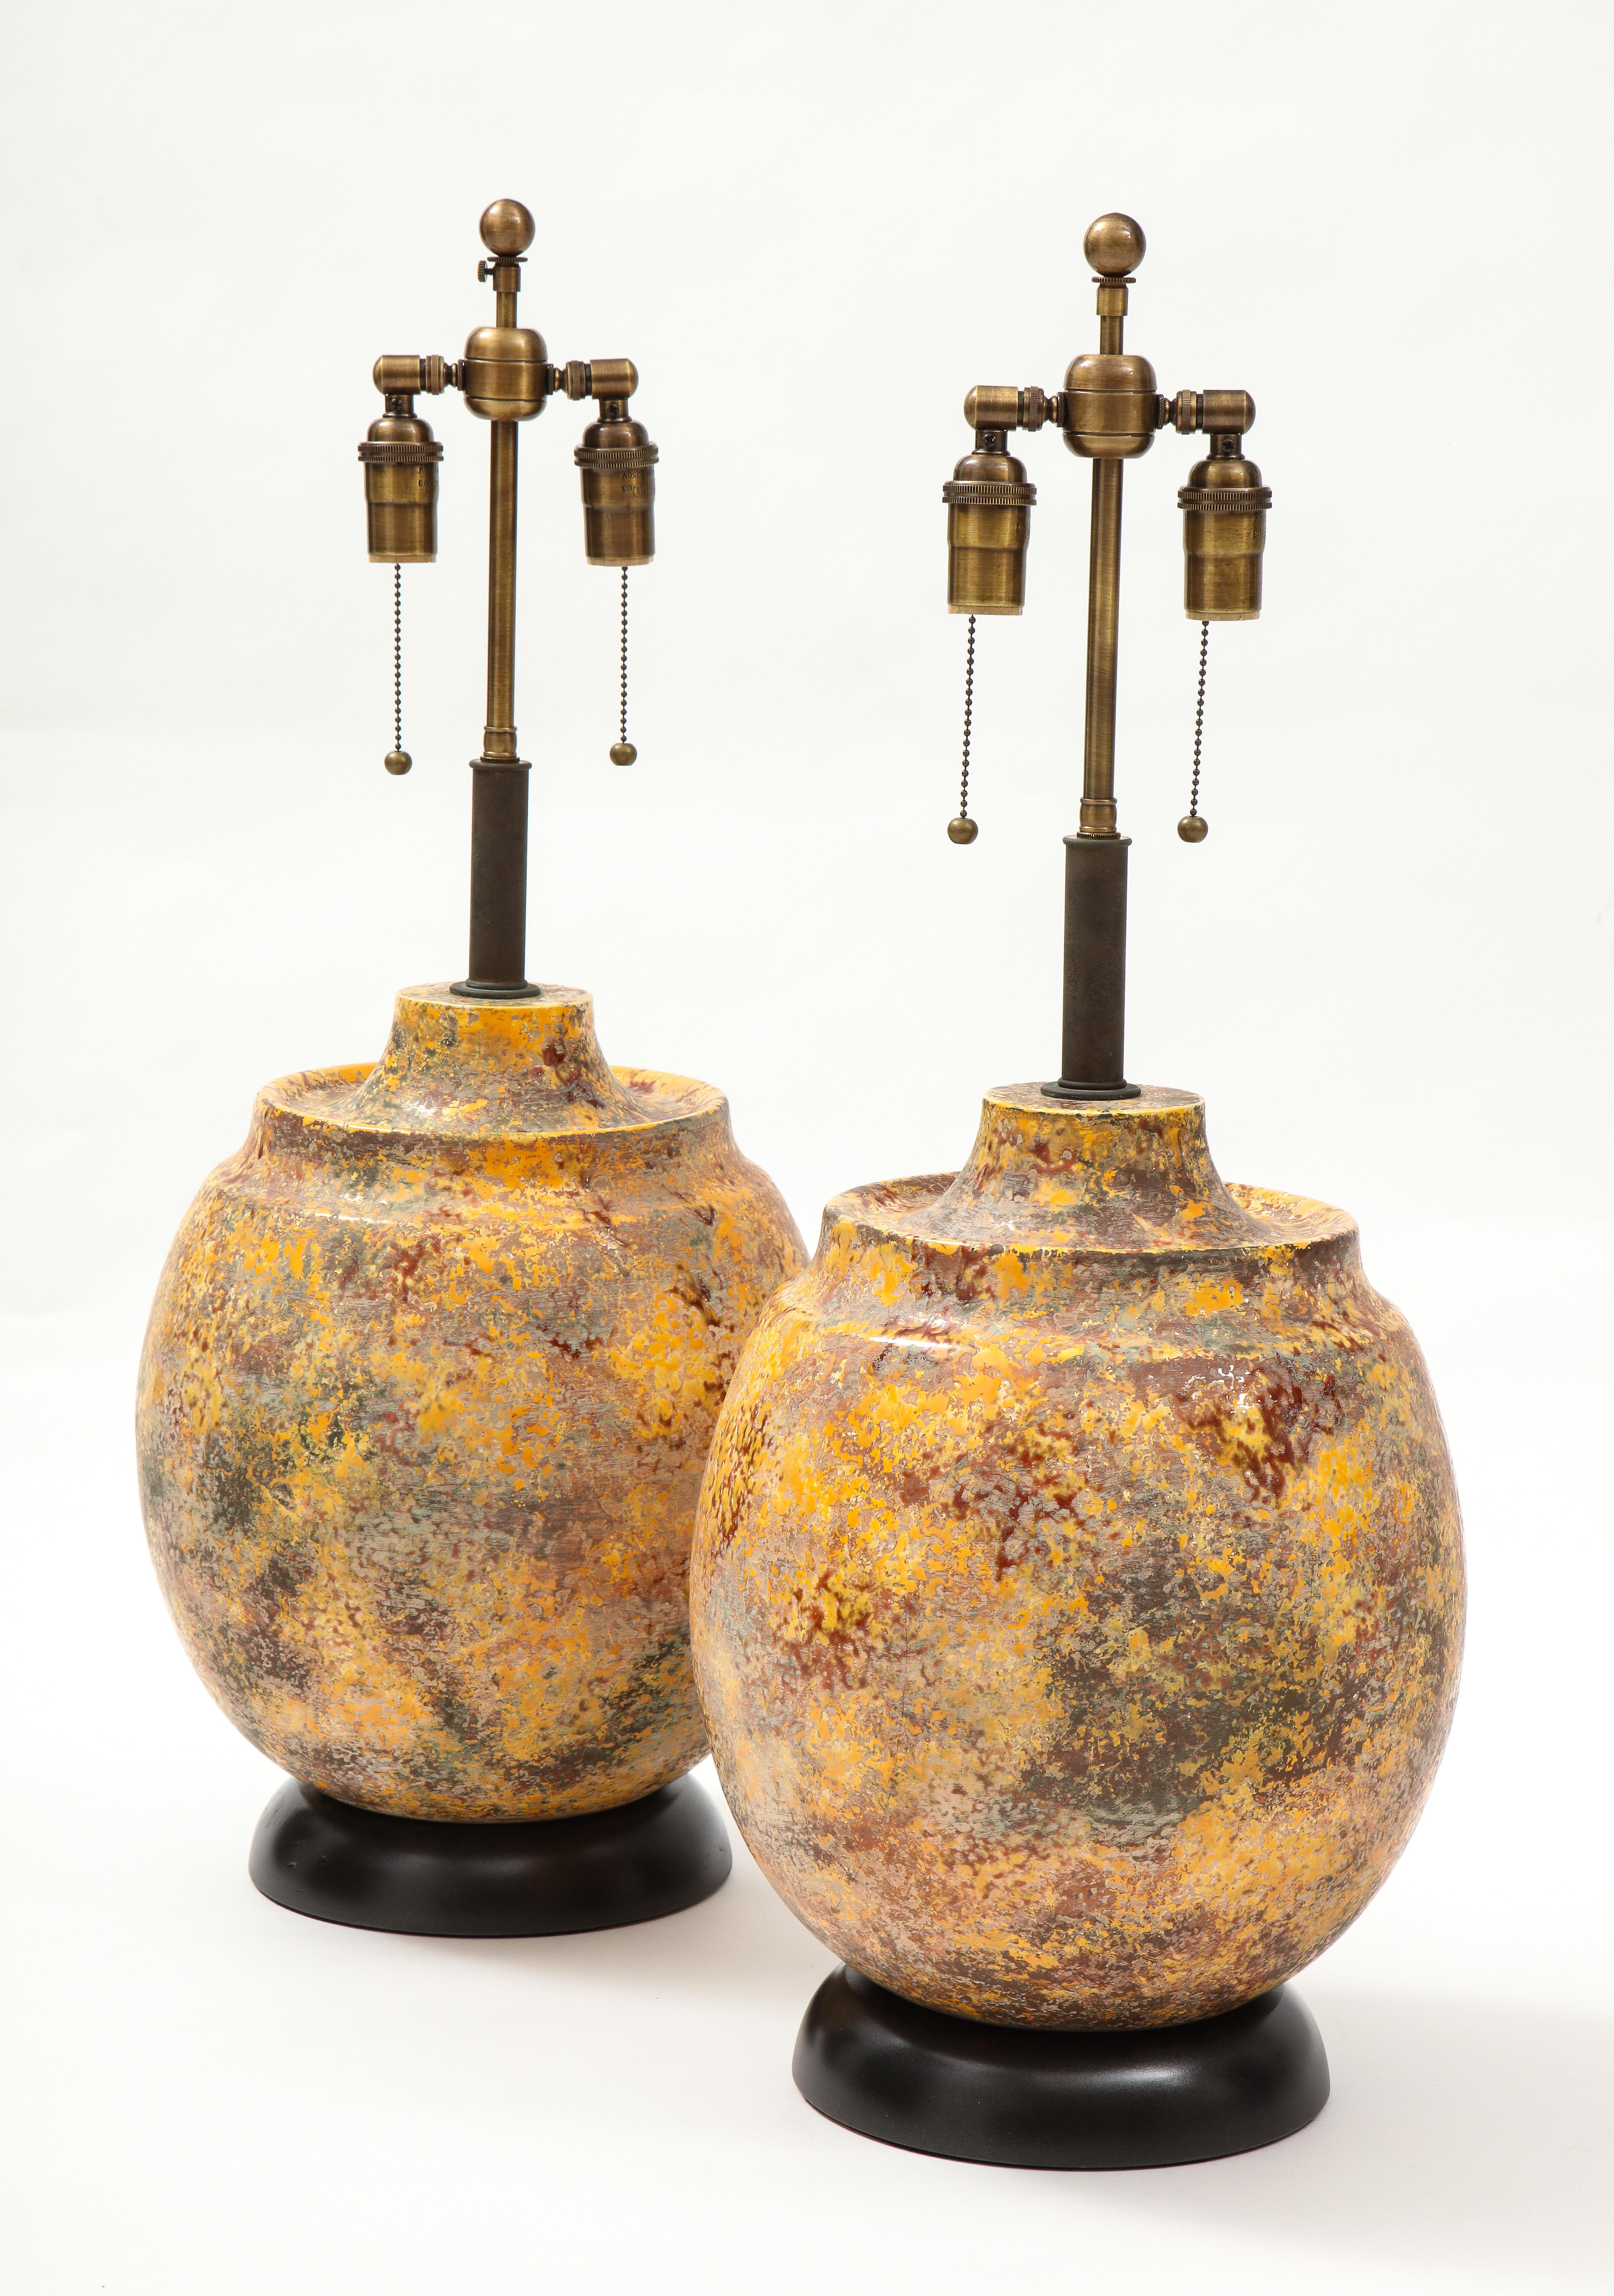 Wonderful pair of 1960's  large Italian ceramic lamps.
The vessel shaped lamps have a textured 